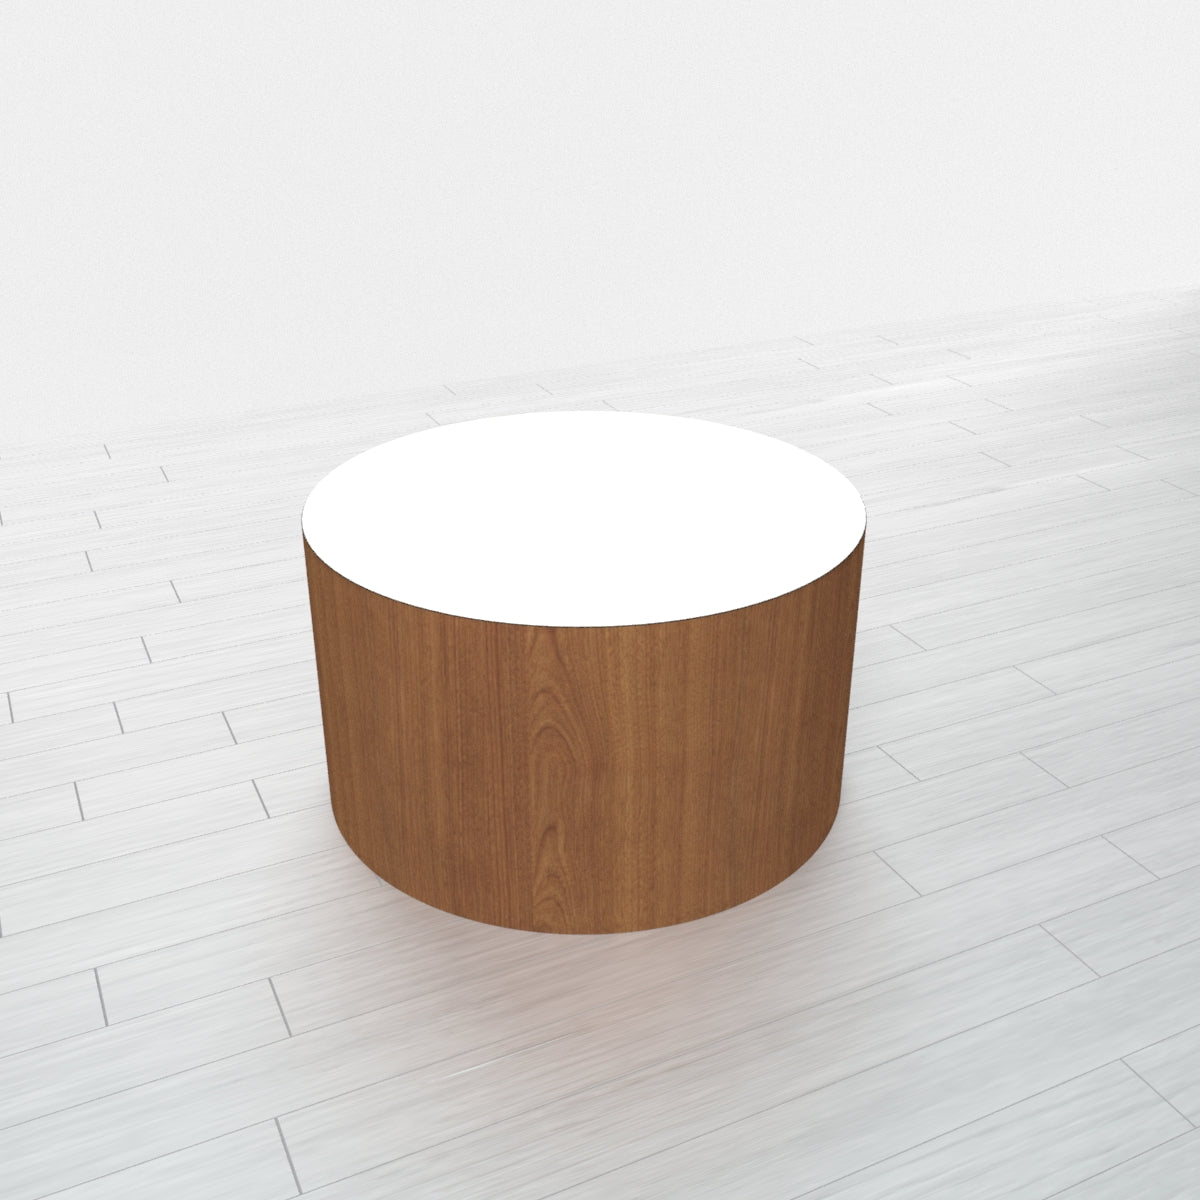 CYLINDRICAL - Cognac Maple Base + White Top - 20x20